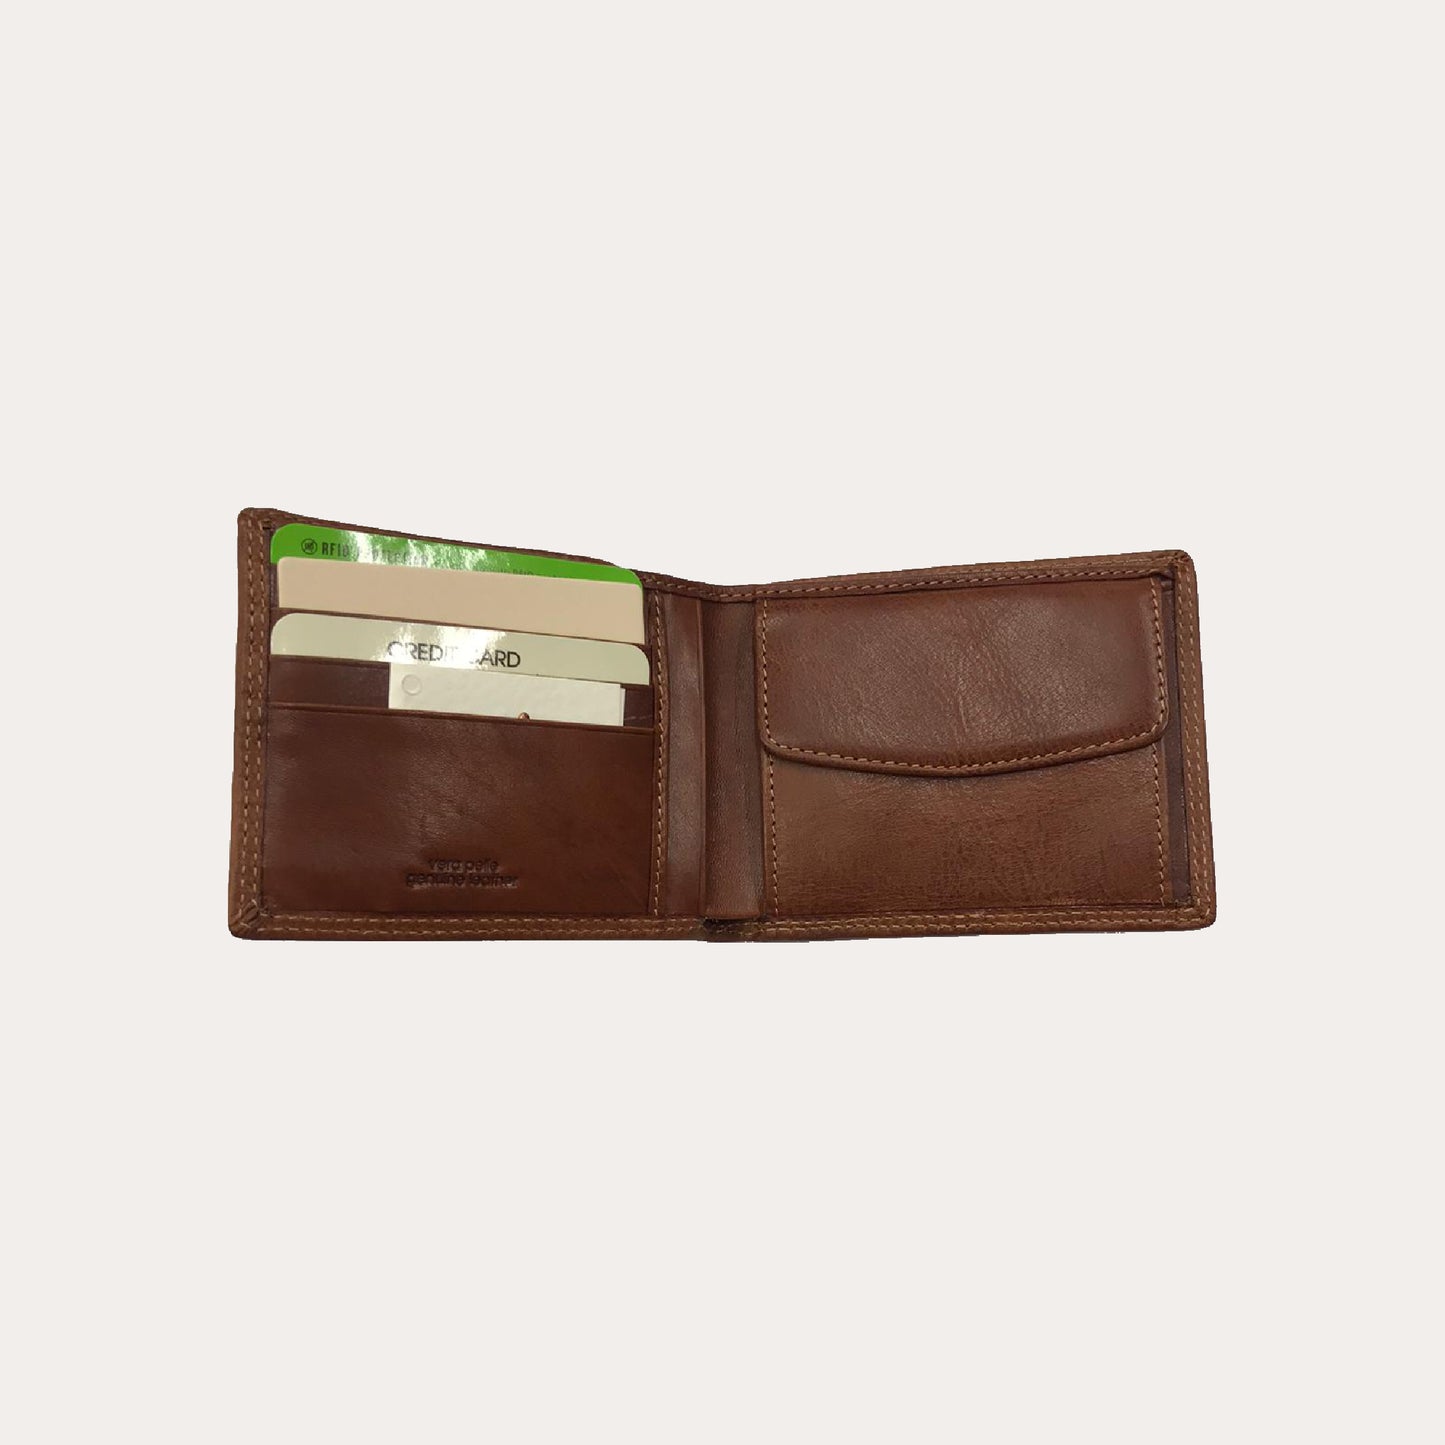 Gianni Conti Tan Leather Wallet-4 Credit Card/Coin Section